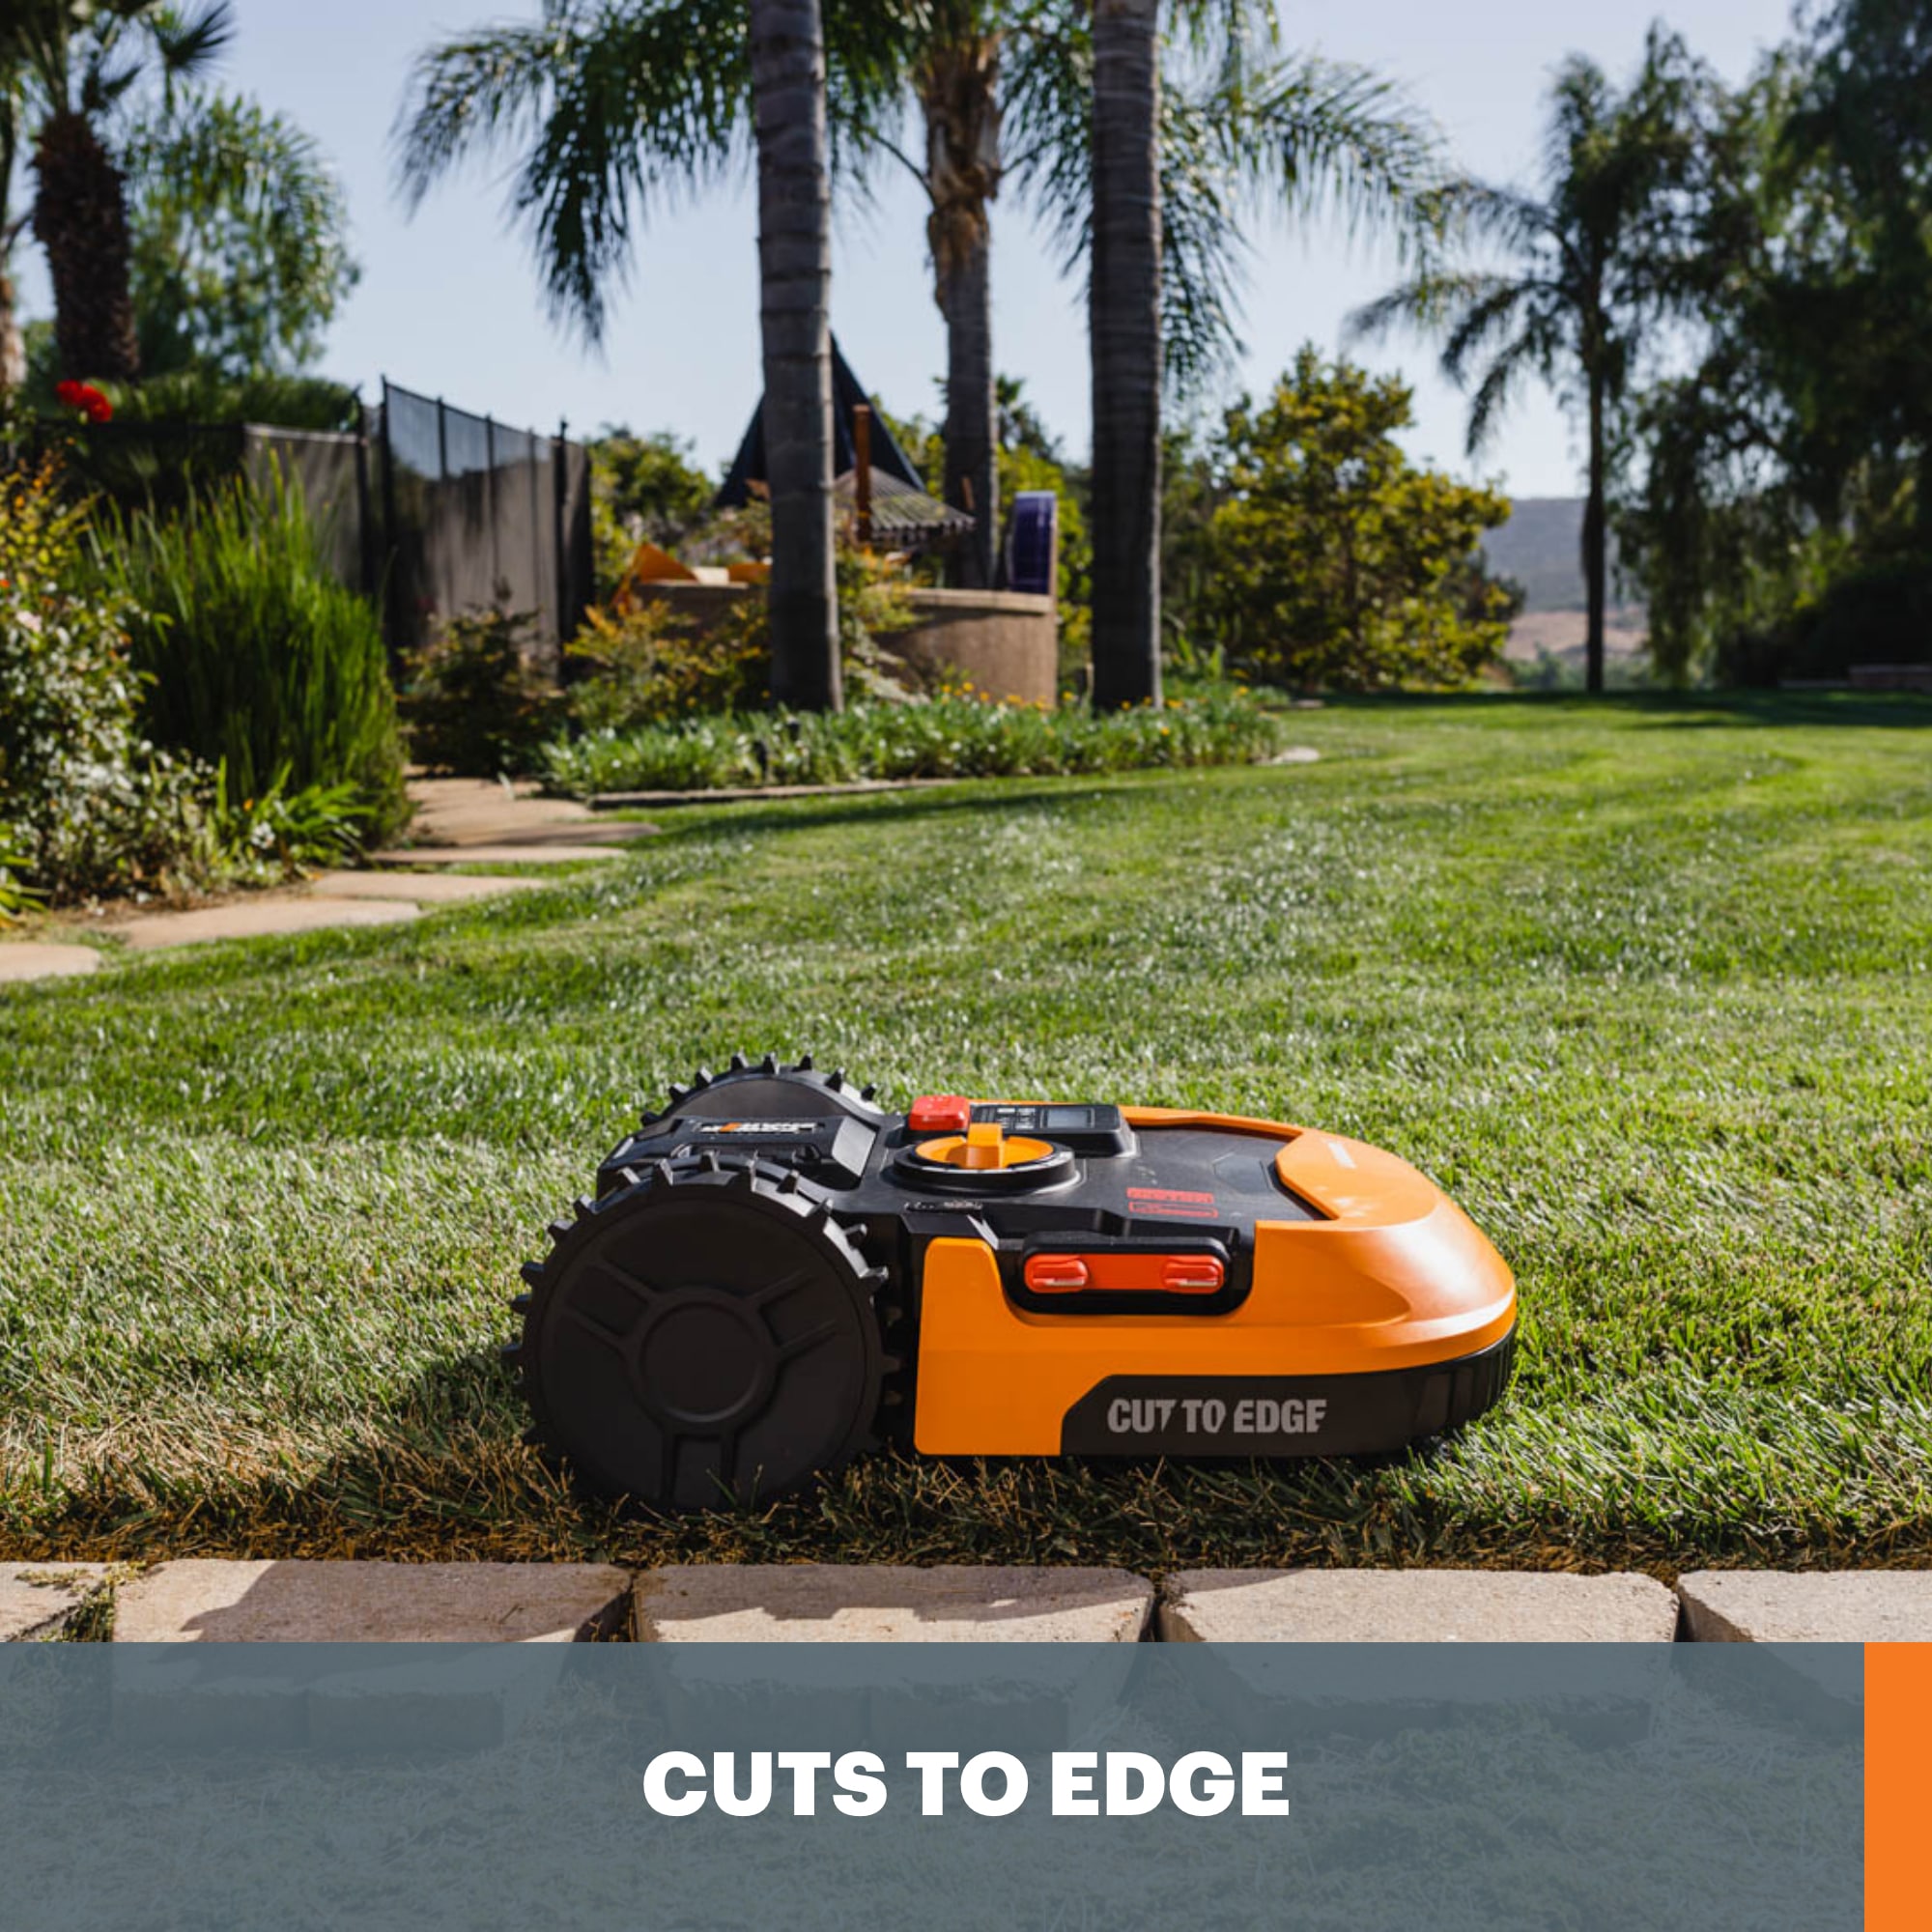 WORX Landroid Robotic Lawn (Up To 1/4 Acre) in the Robotic Lawn Mowers department at